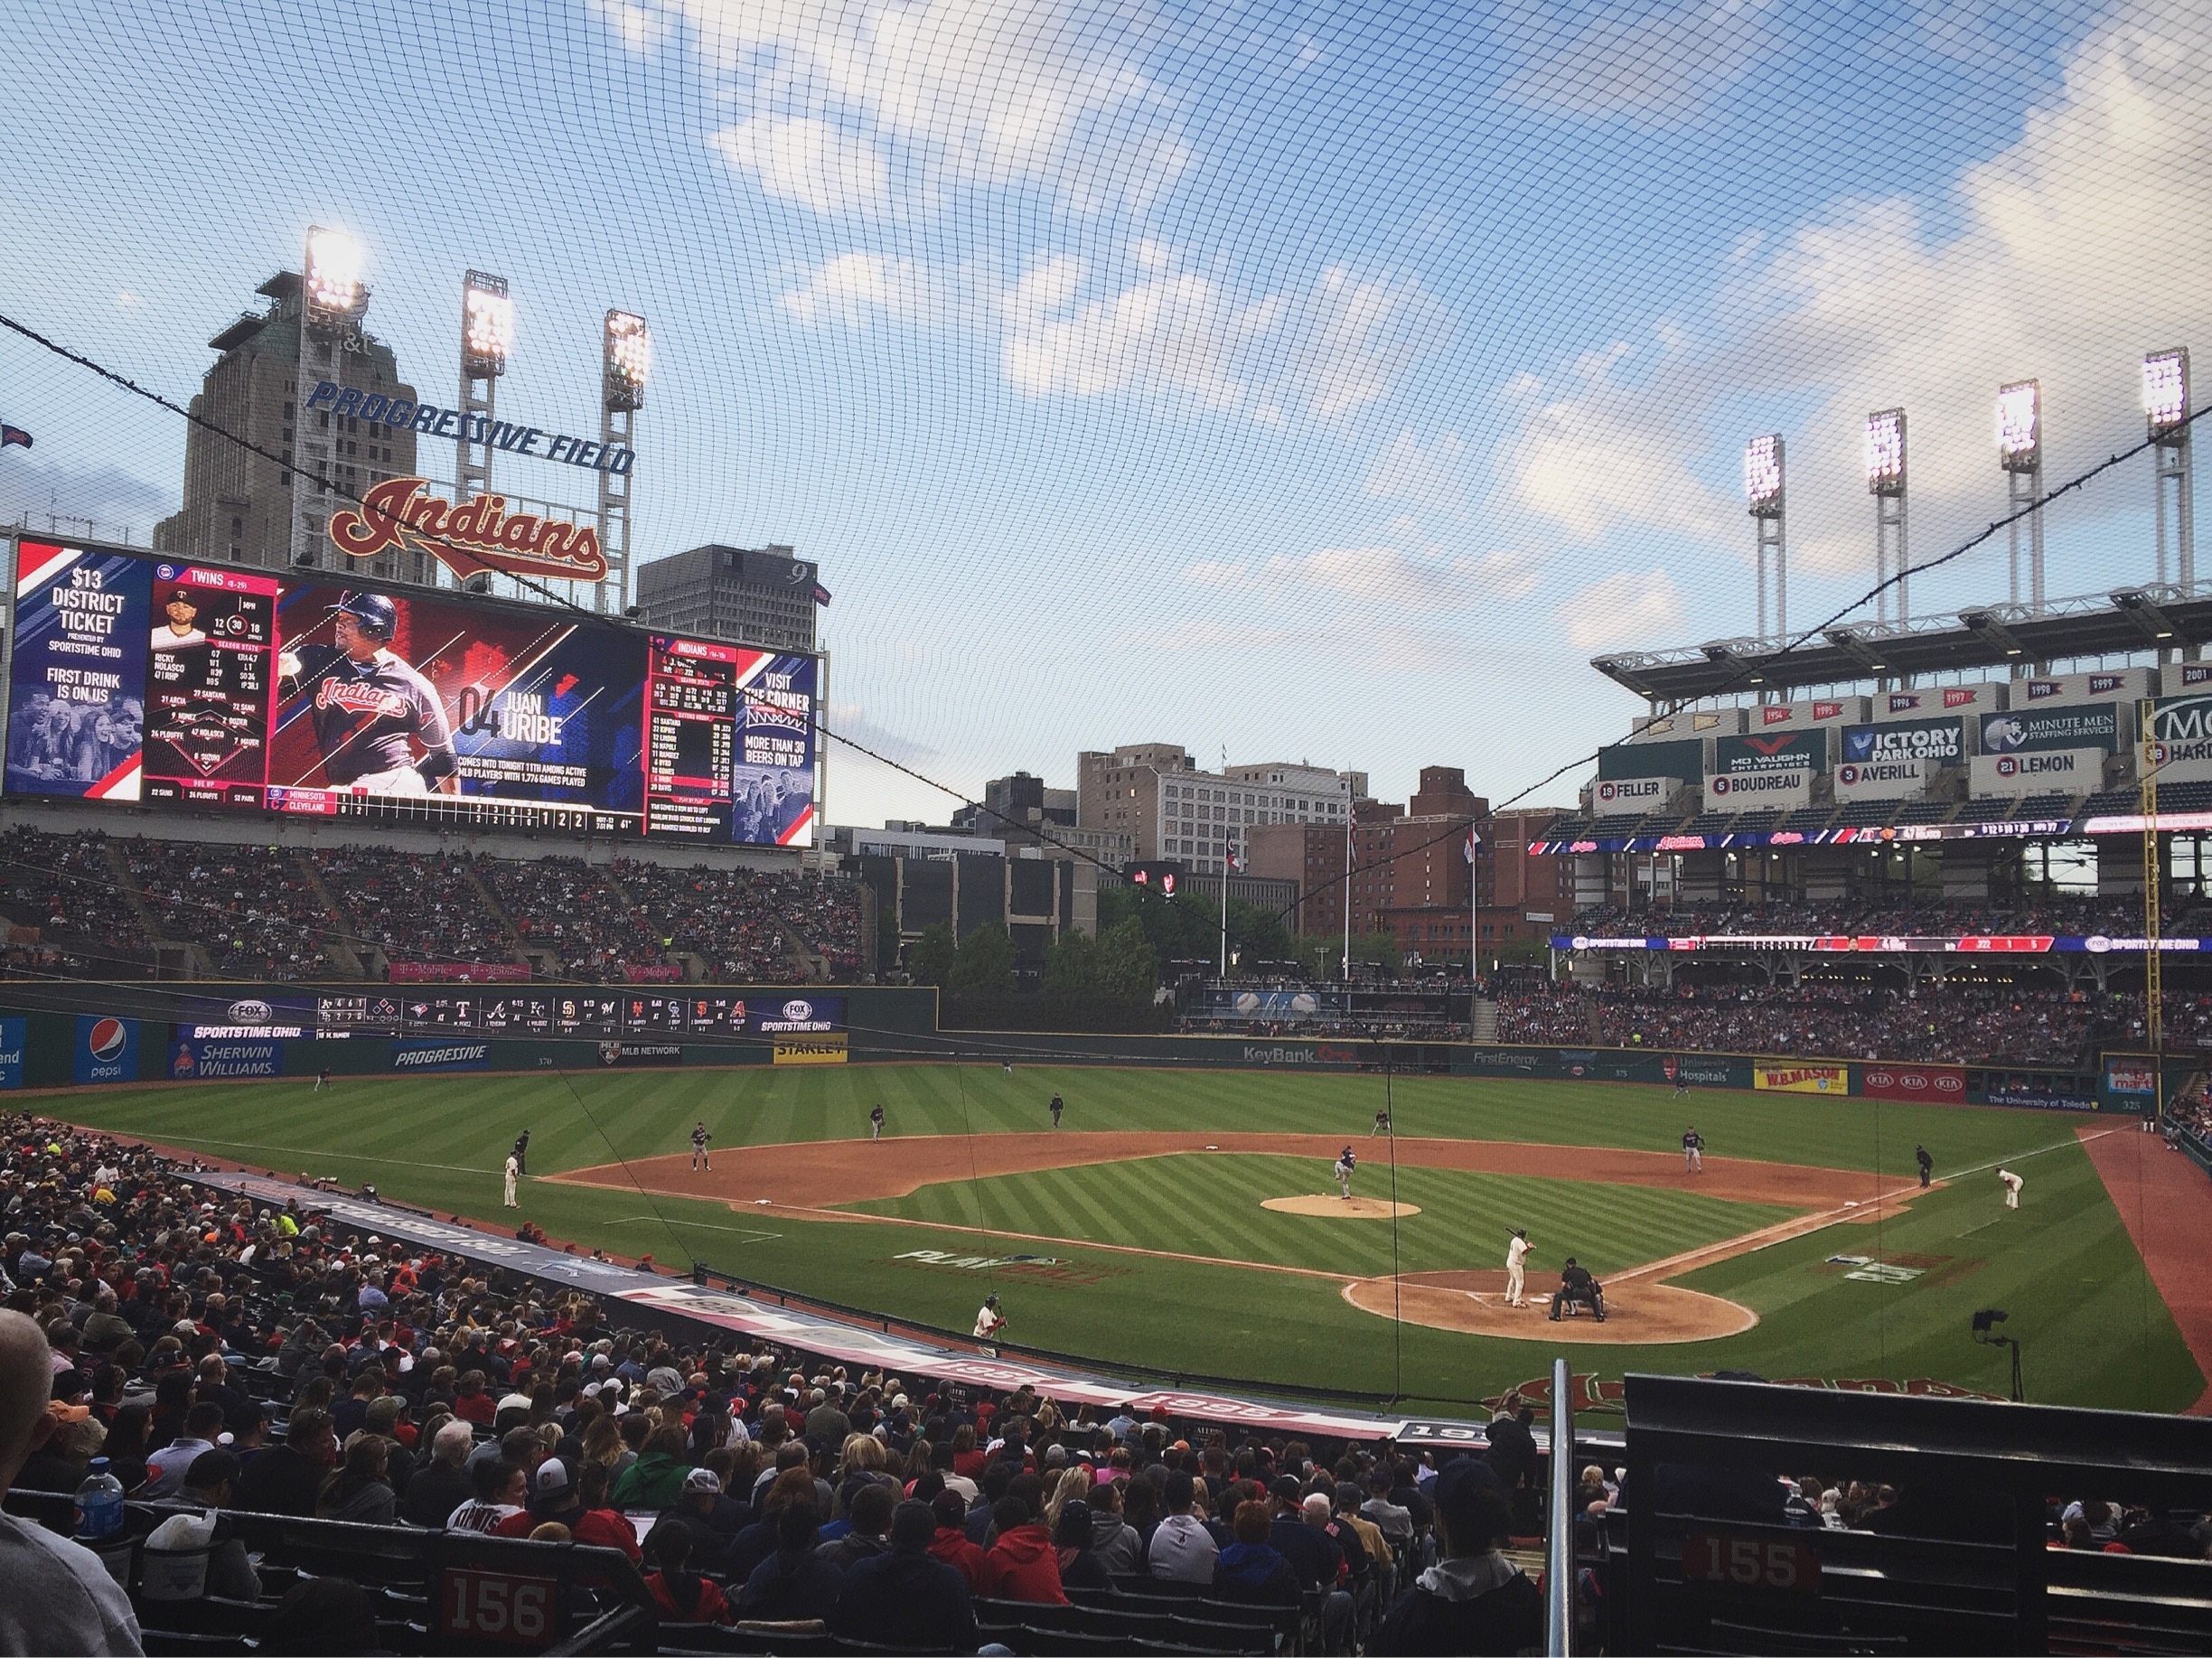 Beautiful ballpark, right in the heart of downtown Cleveland. 

Cleveland Indians - 7 
Minnesota Twins - 6  